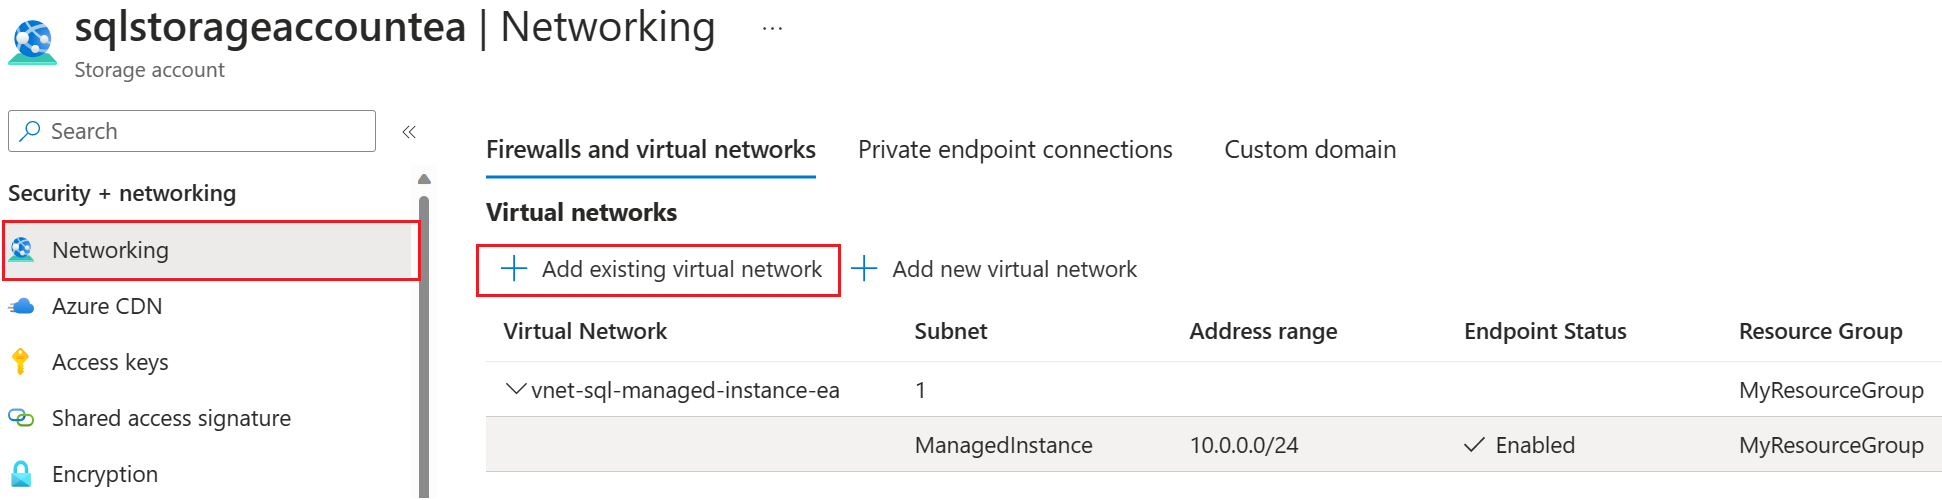 Screenshot of the Storage Account Networking page of the Azure portal, with Add existing virtual network selected.